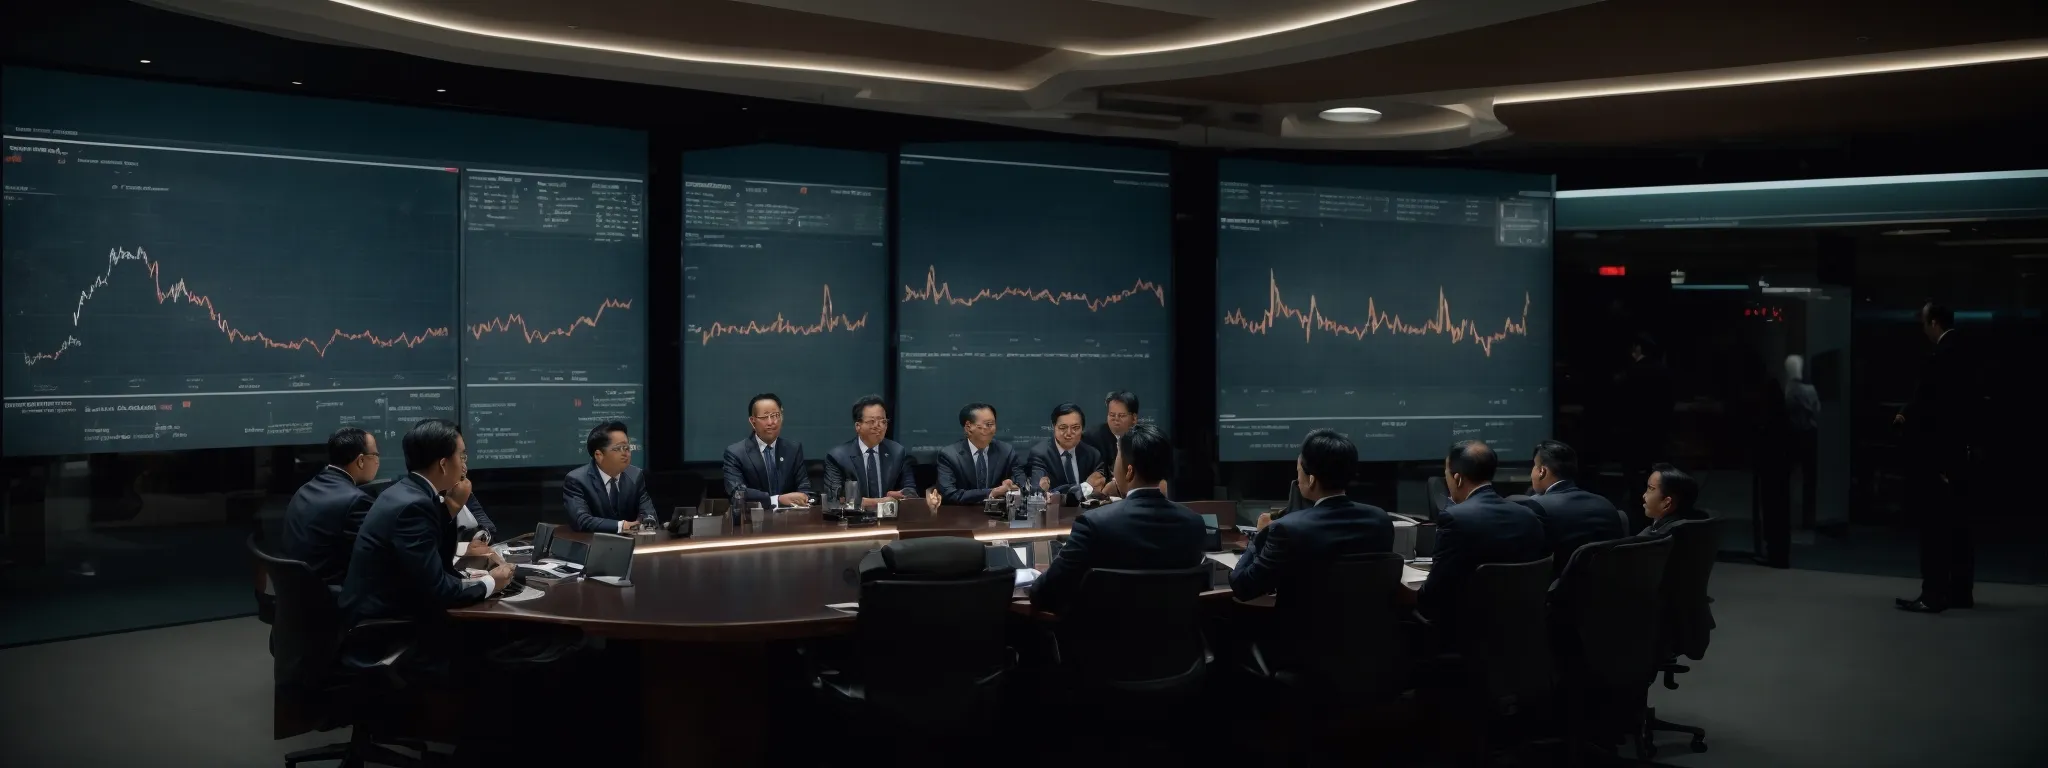 a strategic business meeting with charts reflecting market trends displayed on a large monitor.